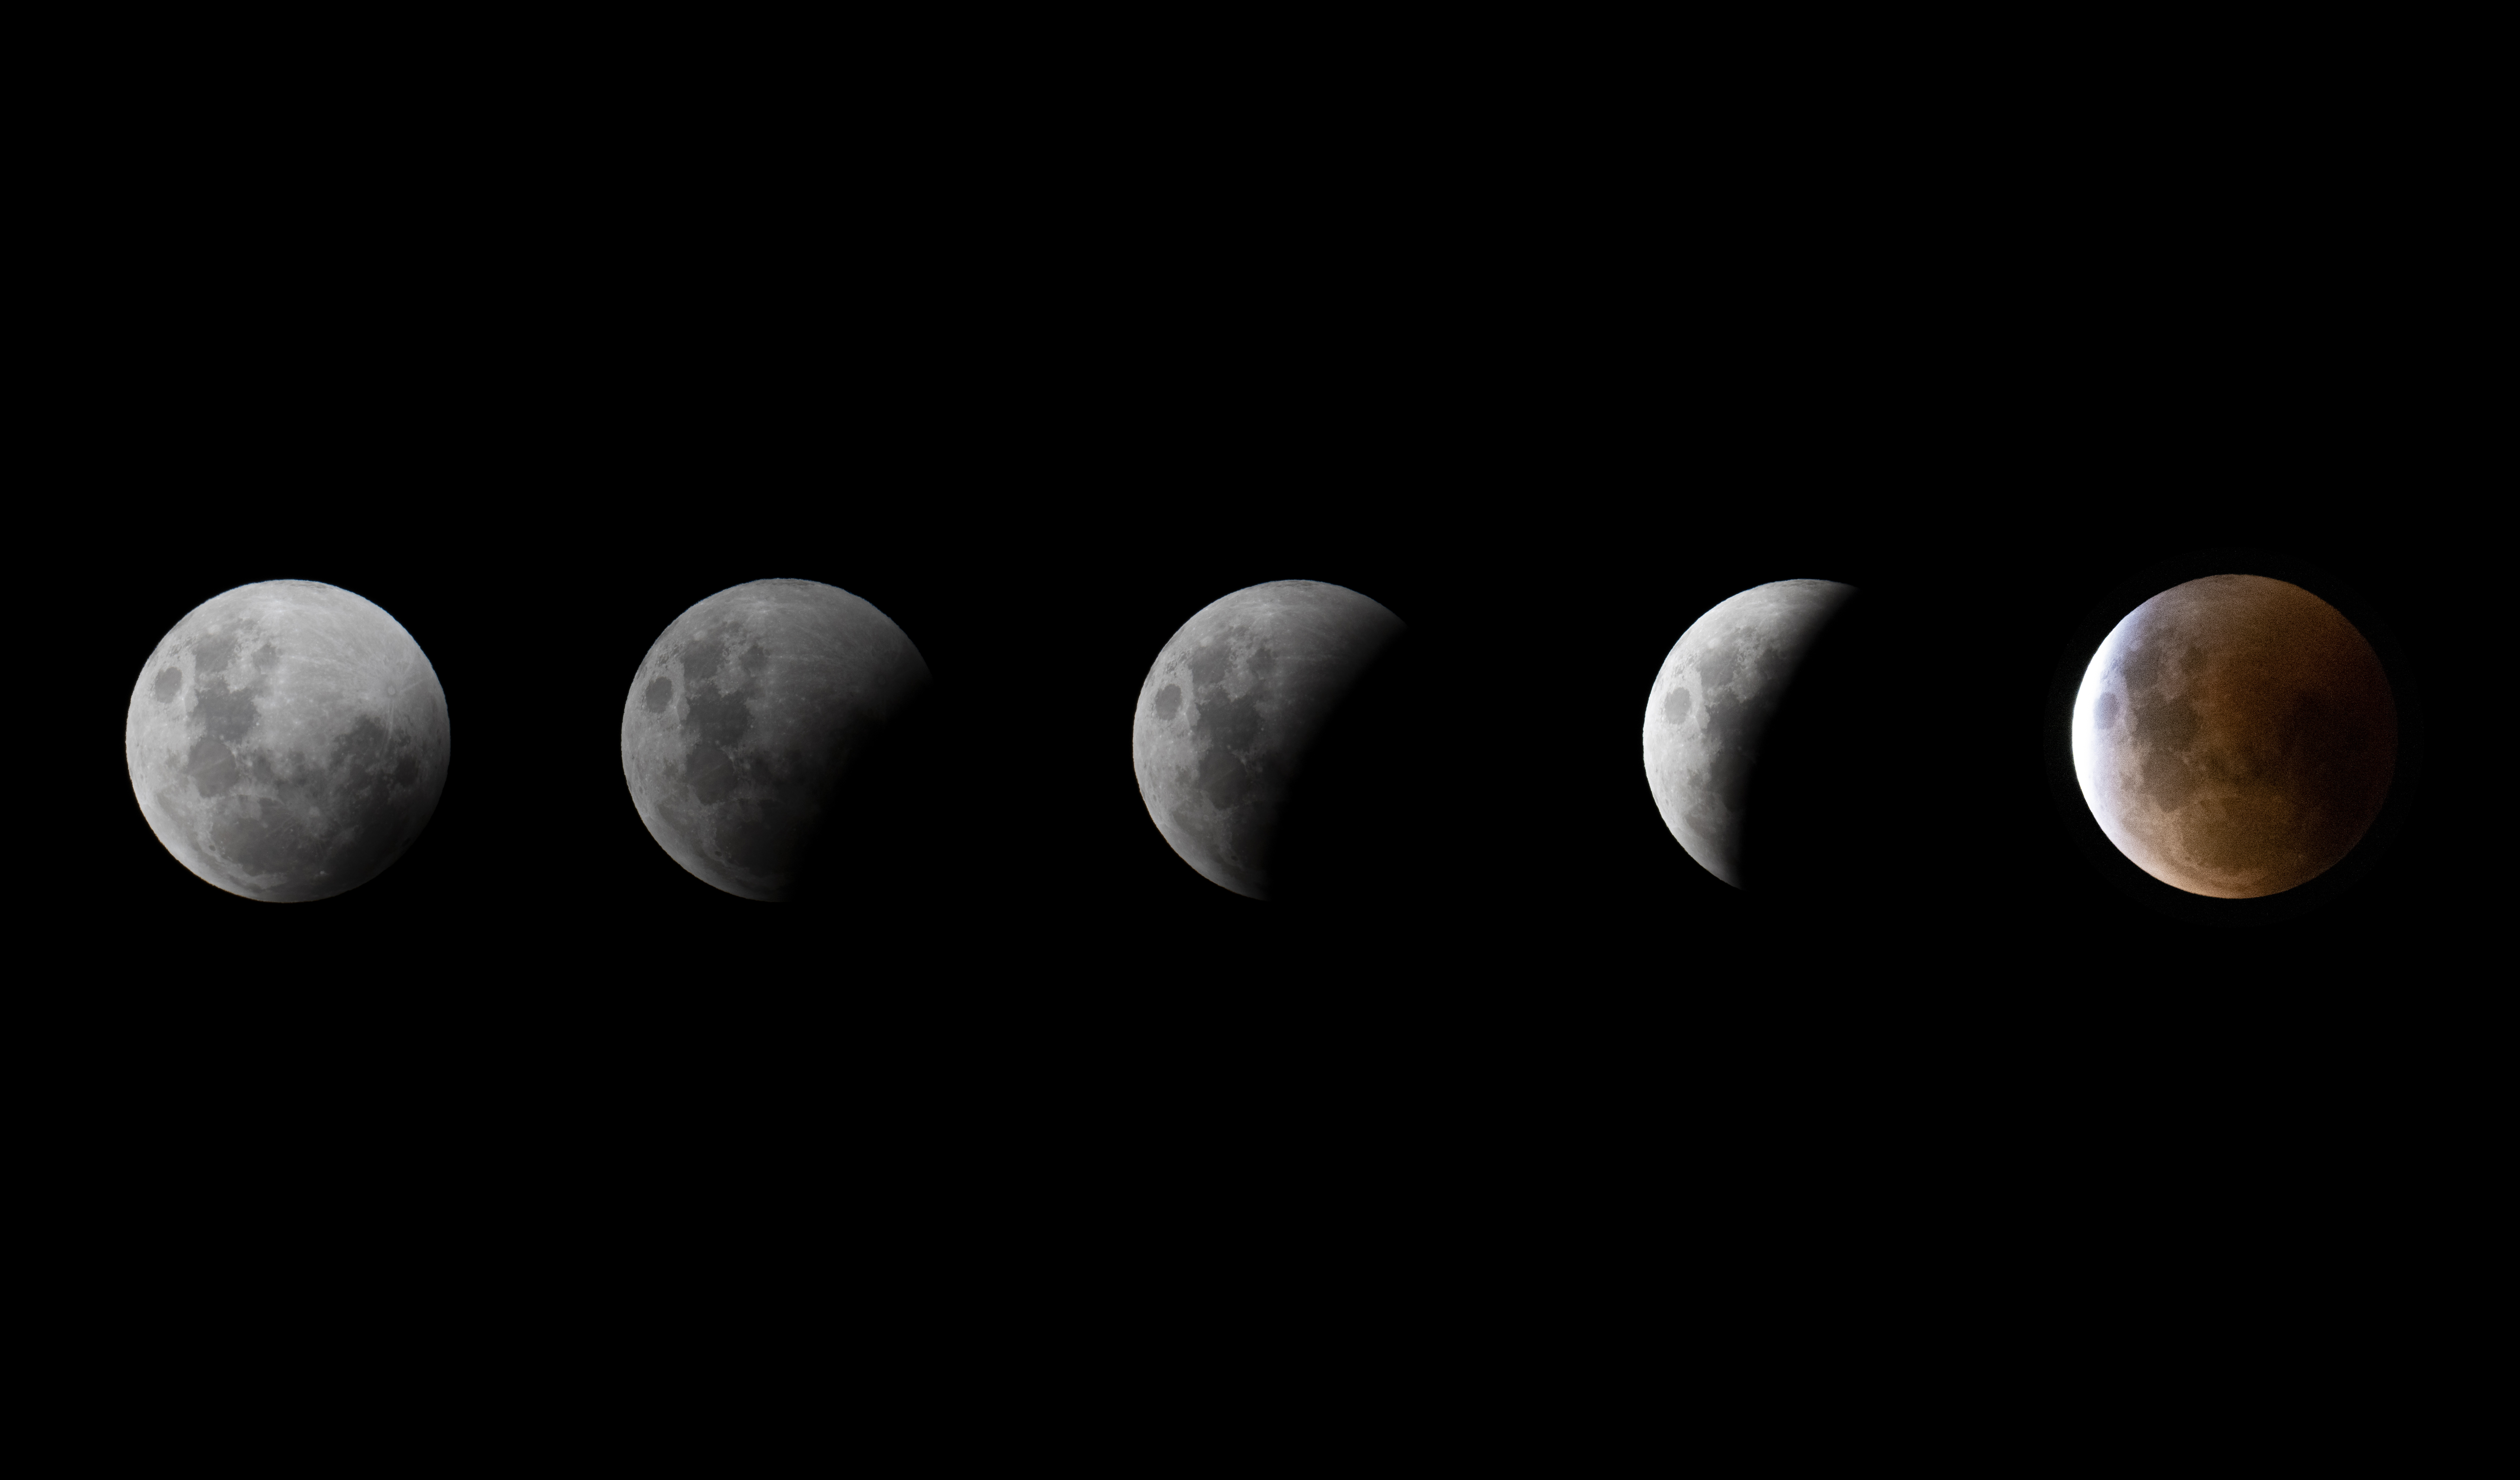 A composite image shows several stages of the blood moon while it was being eclipsed by Earth's shadow on Nov. 8, 2022. The individual images were snapped in Christchurch, New Zealand. (Photo by Sanka Vidanagama/NurPhoto via Getty Images)